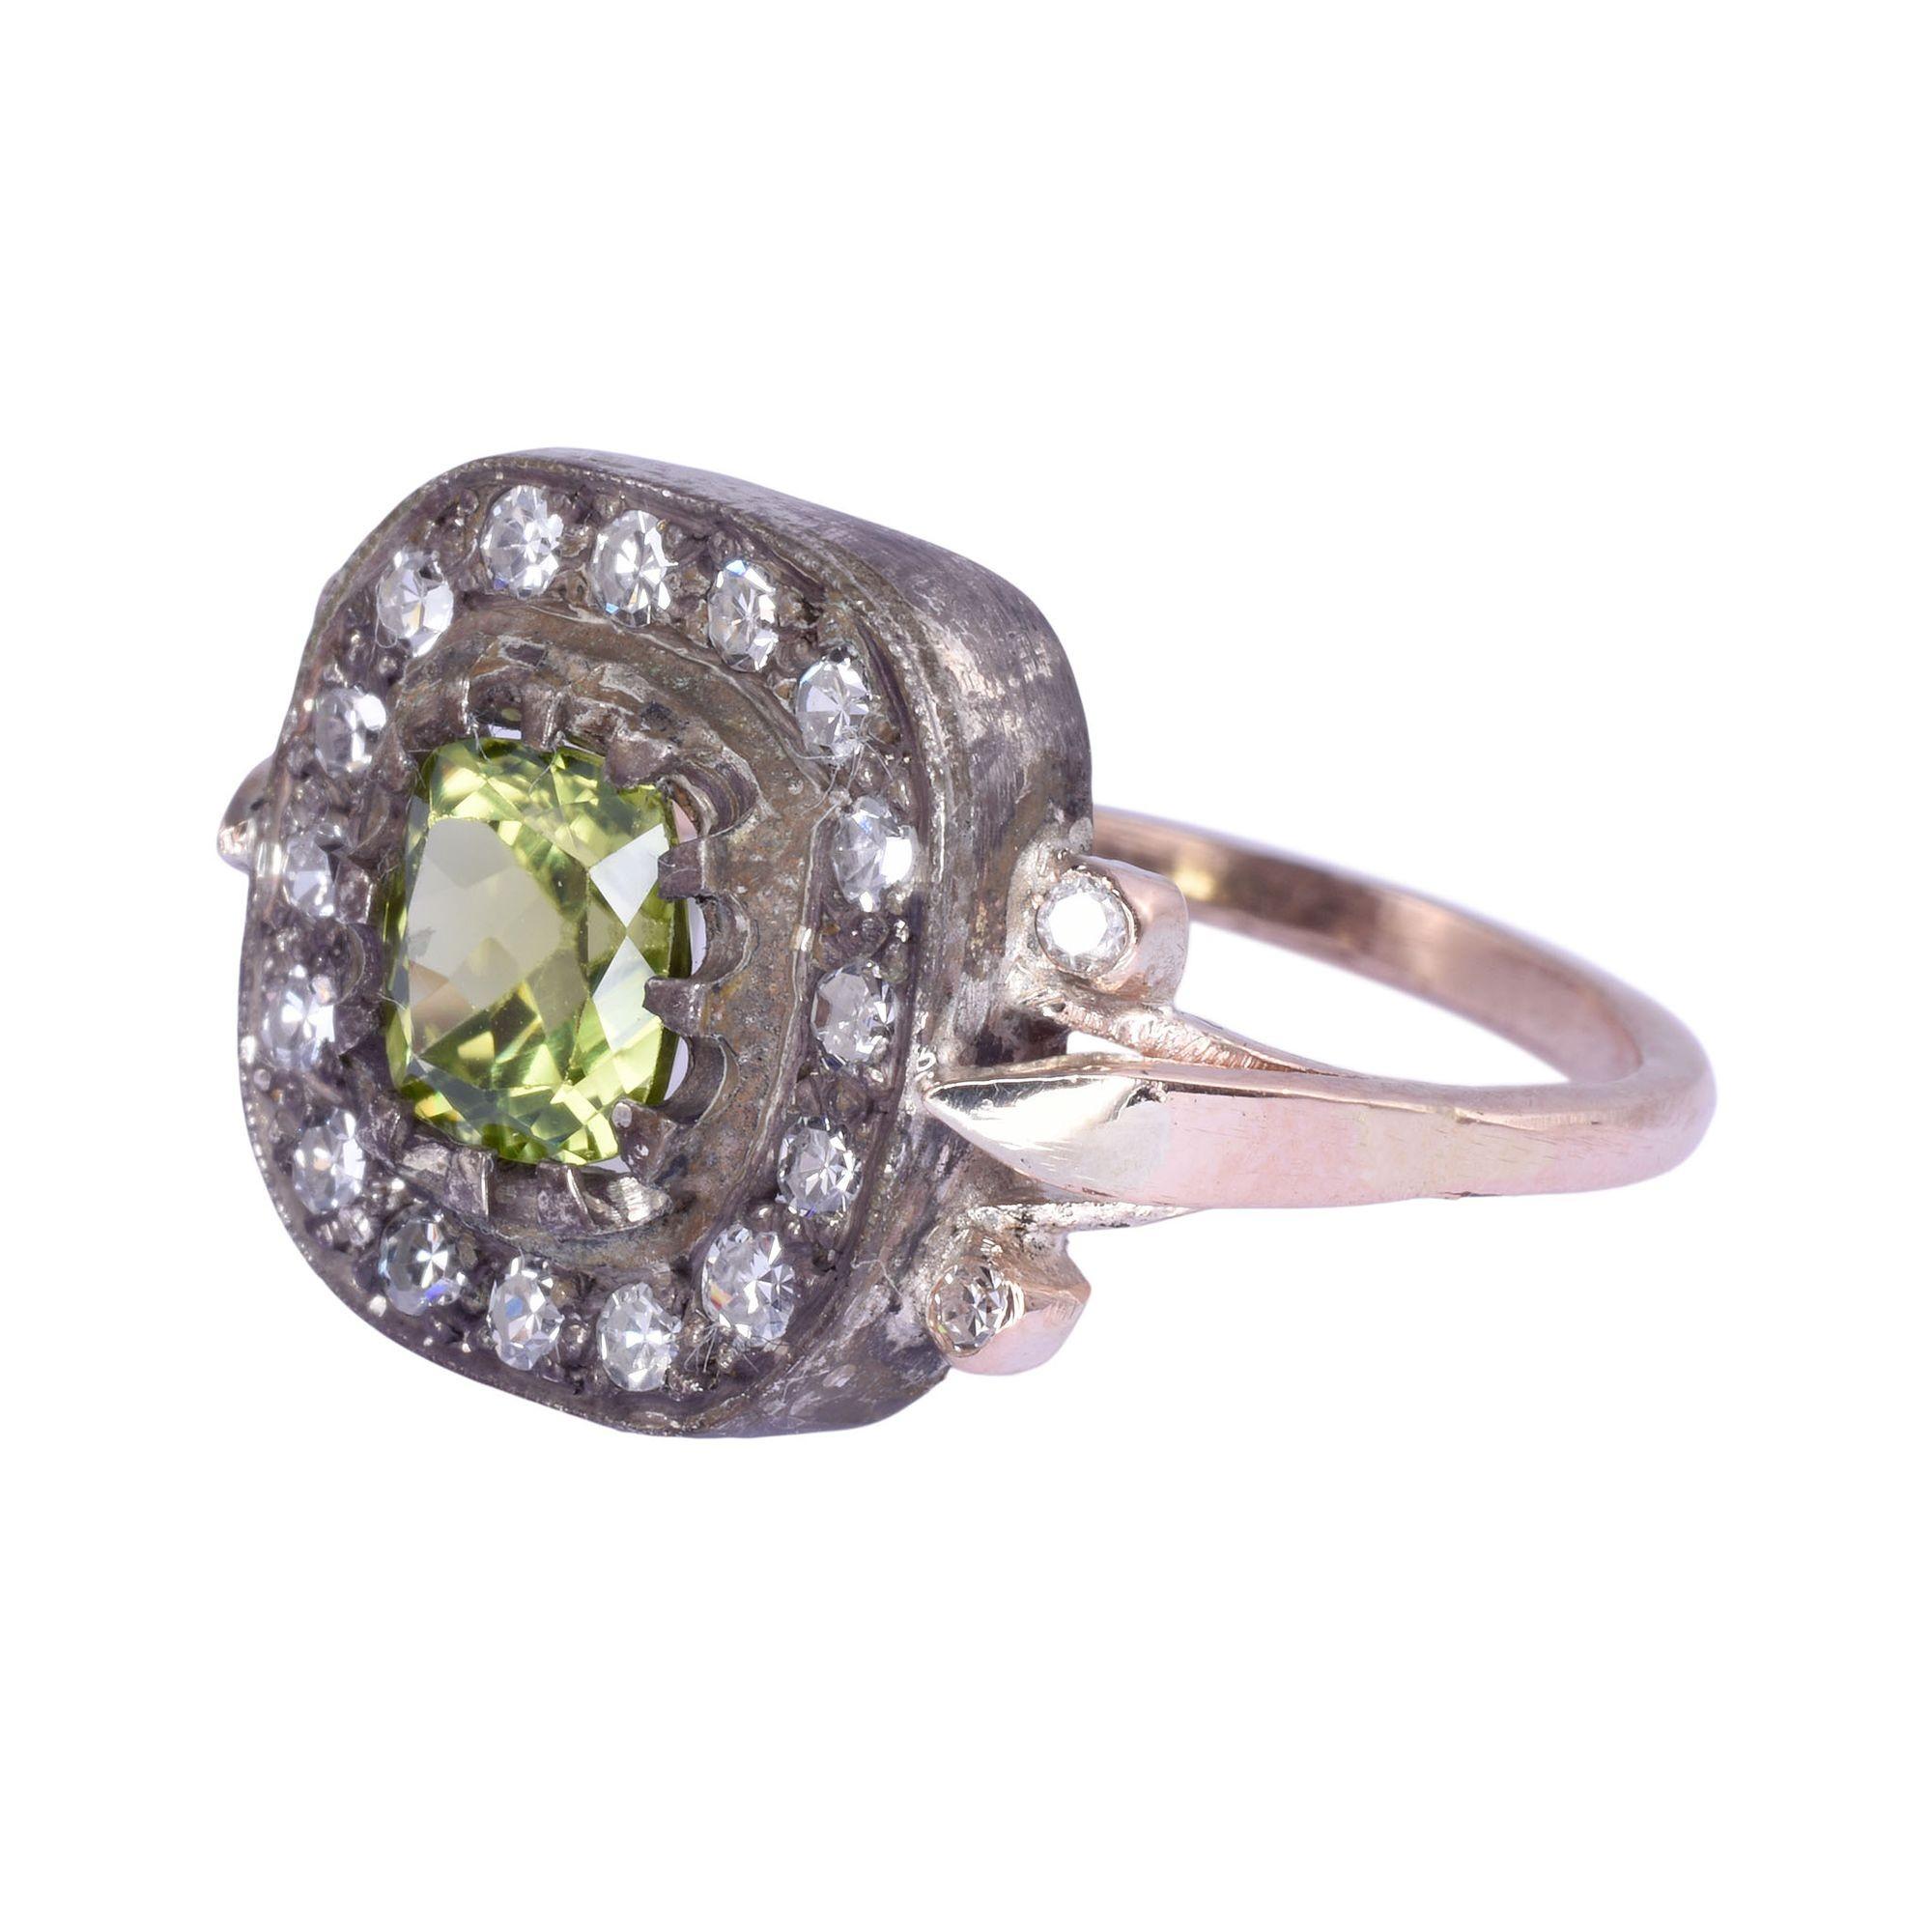 Vintage peridot diamond 14K & sterling silver ring. This vintage ring is crafted in 14 karat yellow gold and sterling silver. It features a 1.05 carat peridot center accented with .46 carat total weight of single cut diamonds. The diamond have VS